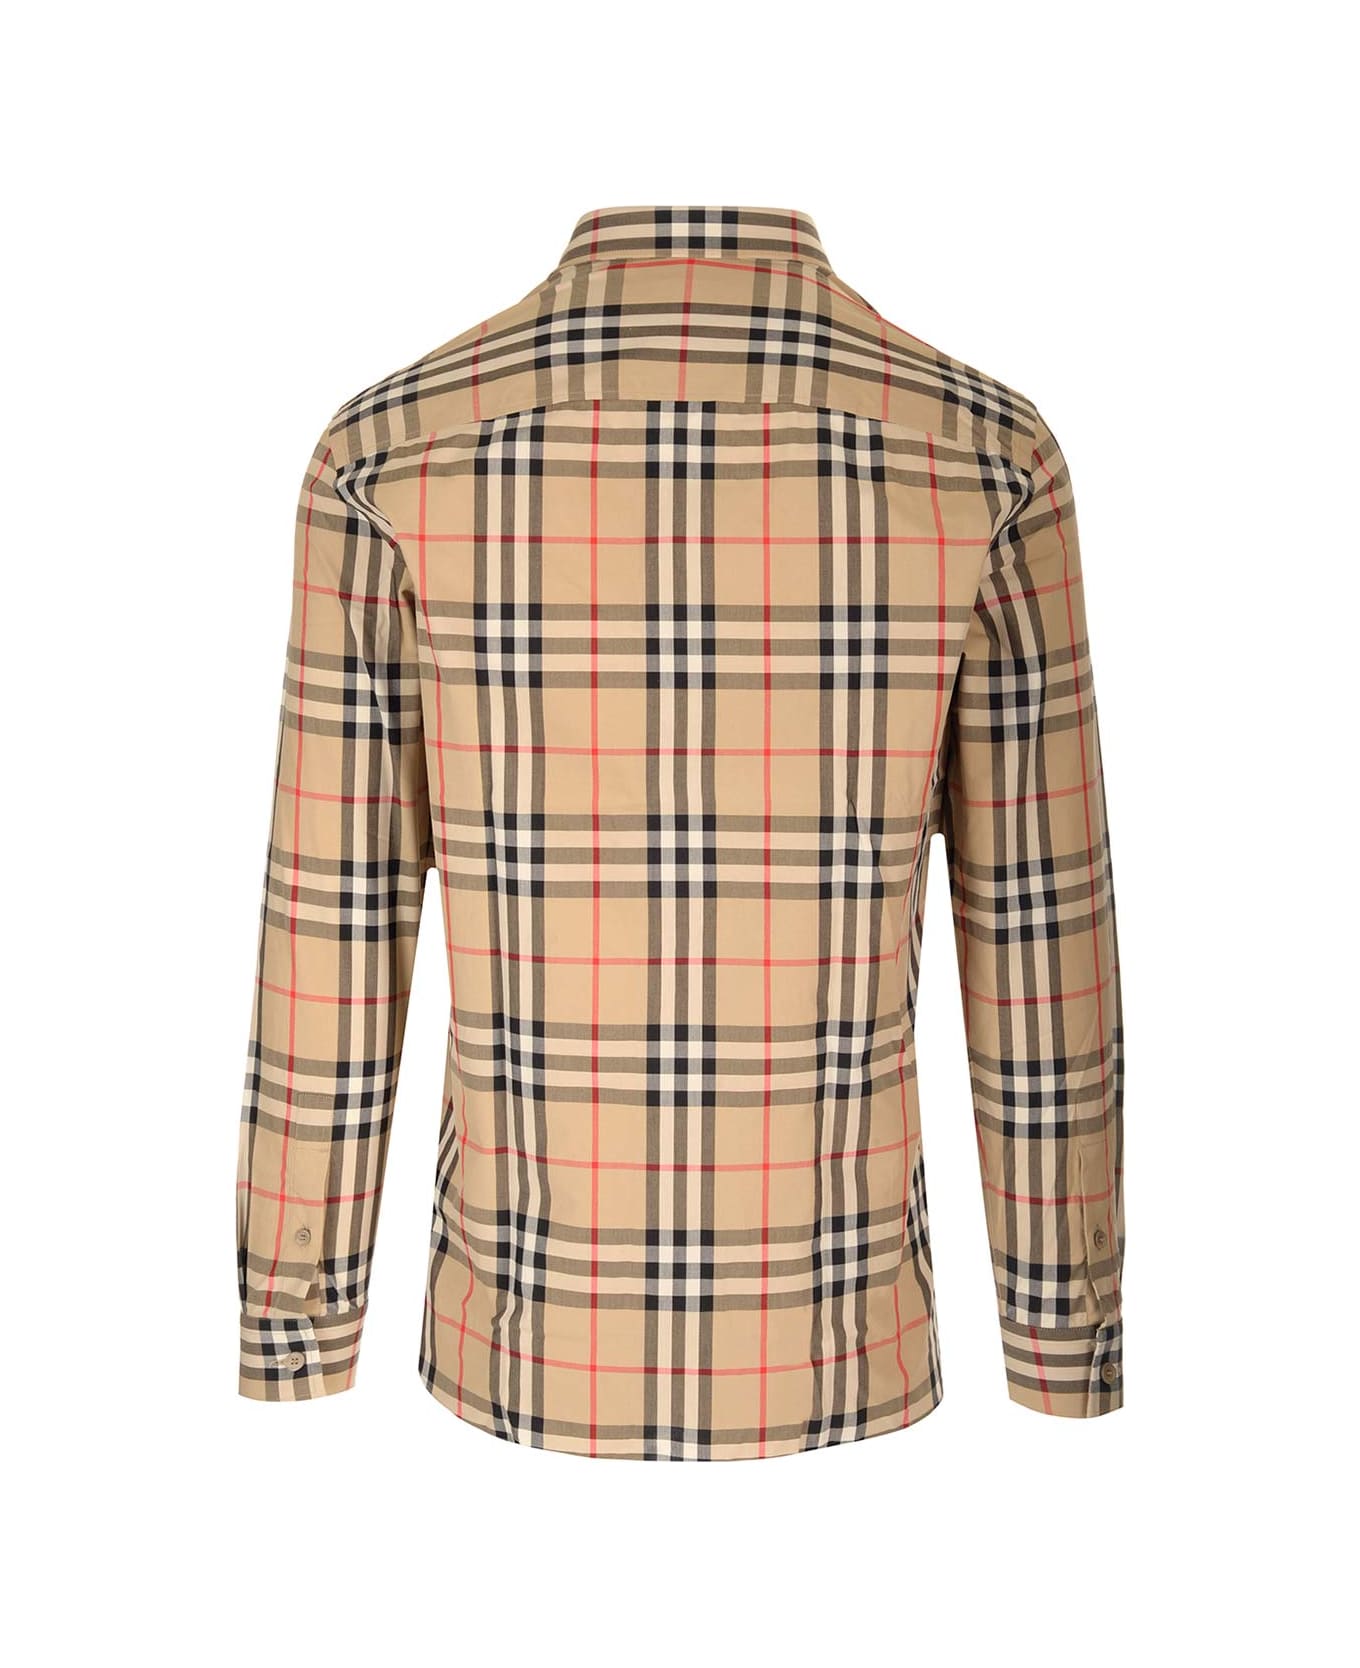 Burberry Cotton Shirt With Check Pattern - Beige